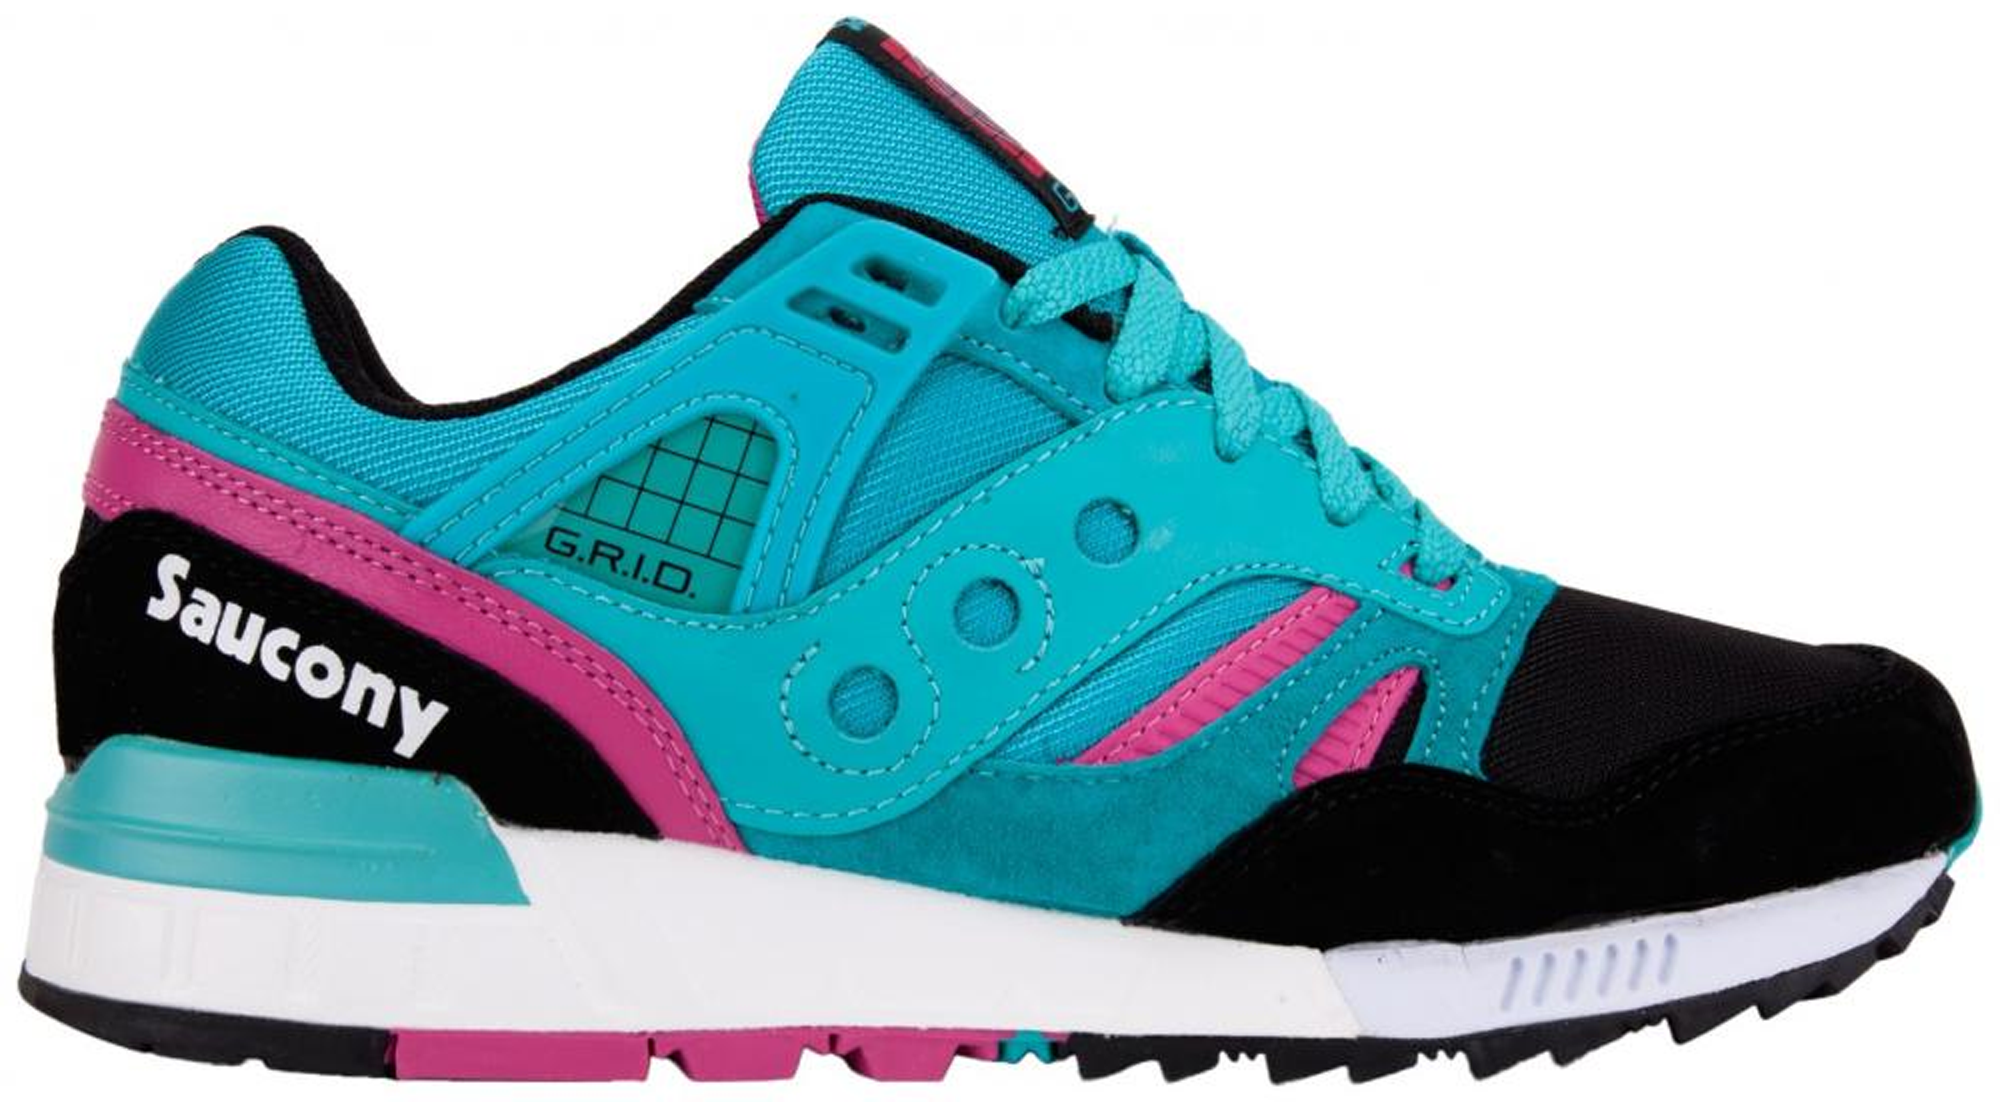 NEW IN BOX Mens Saucony Grid SD Teal Black Casual Running shoes S70164-2 SZ 7-10 